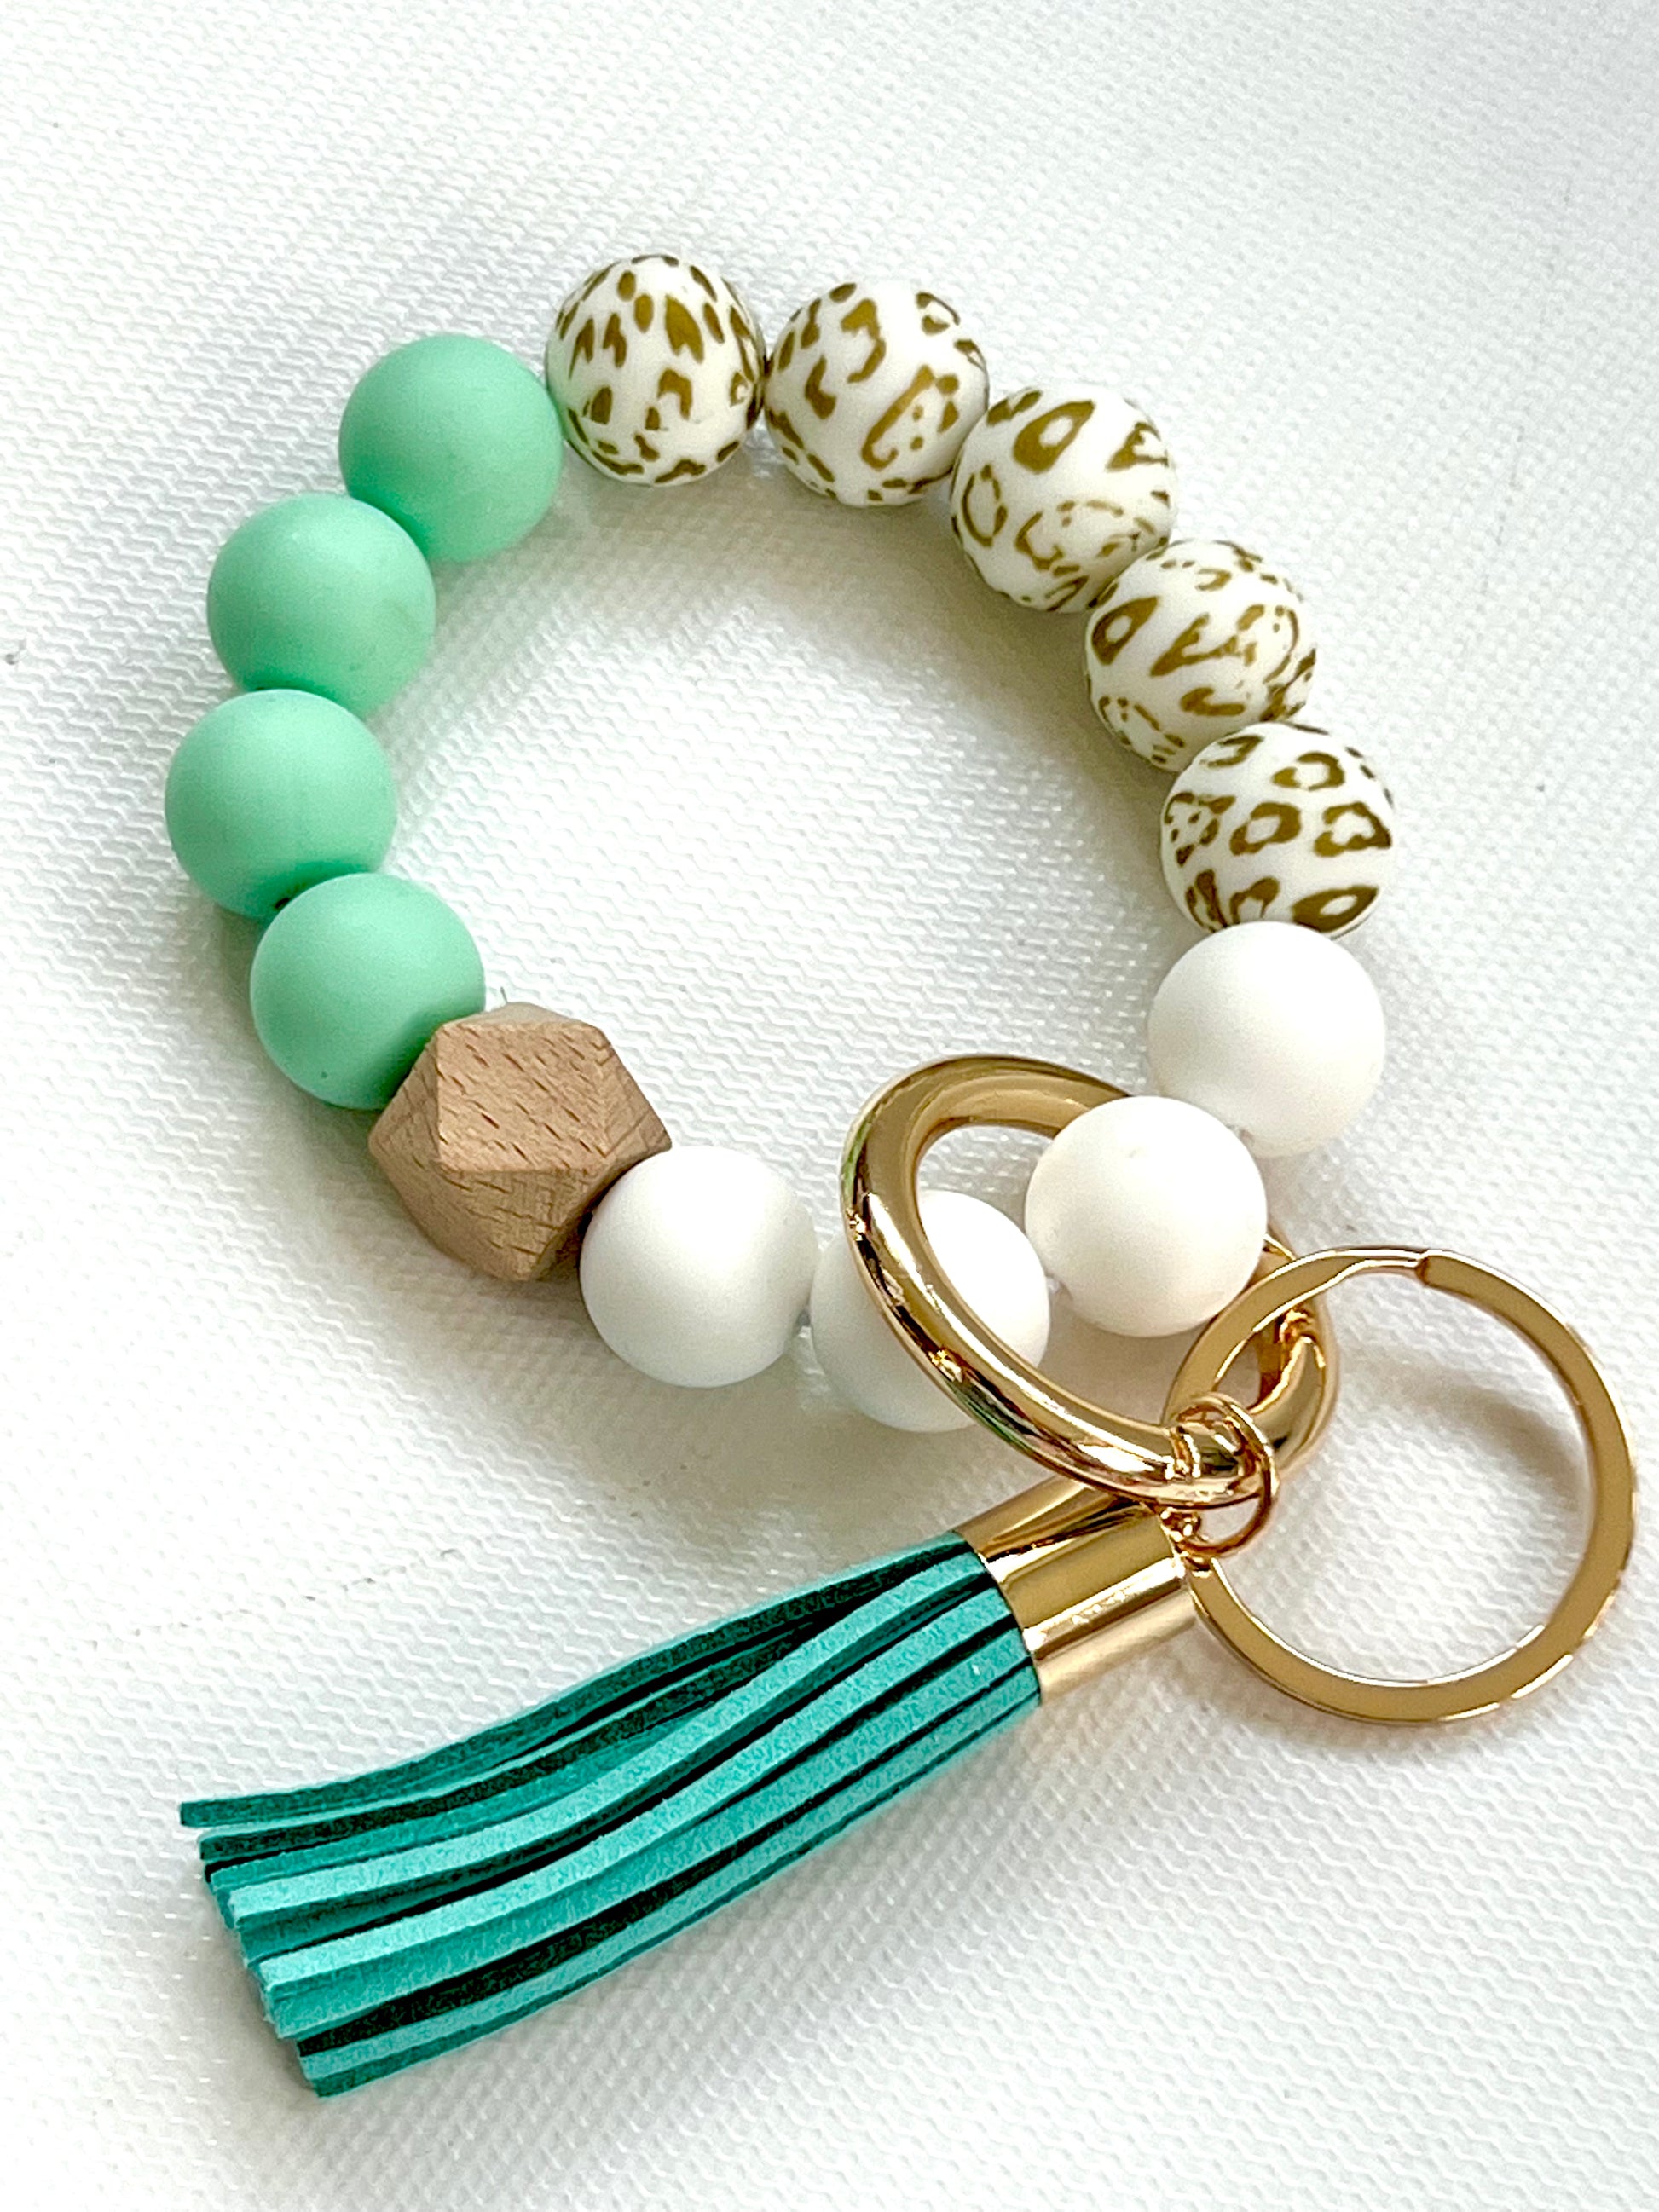 Silicone & wood beads with a leather tassel.